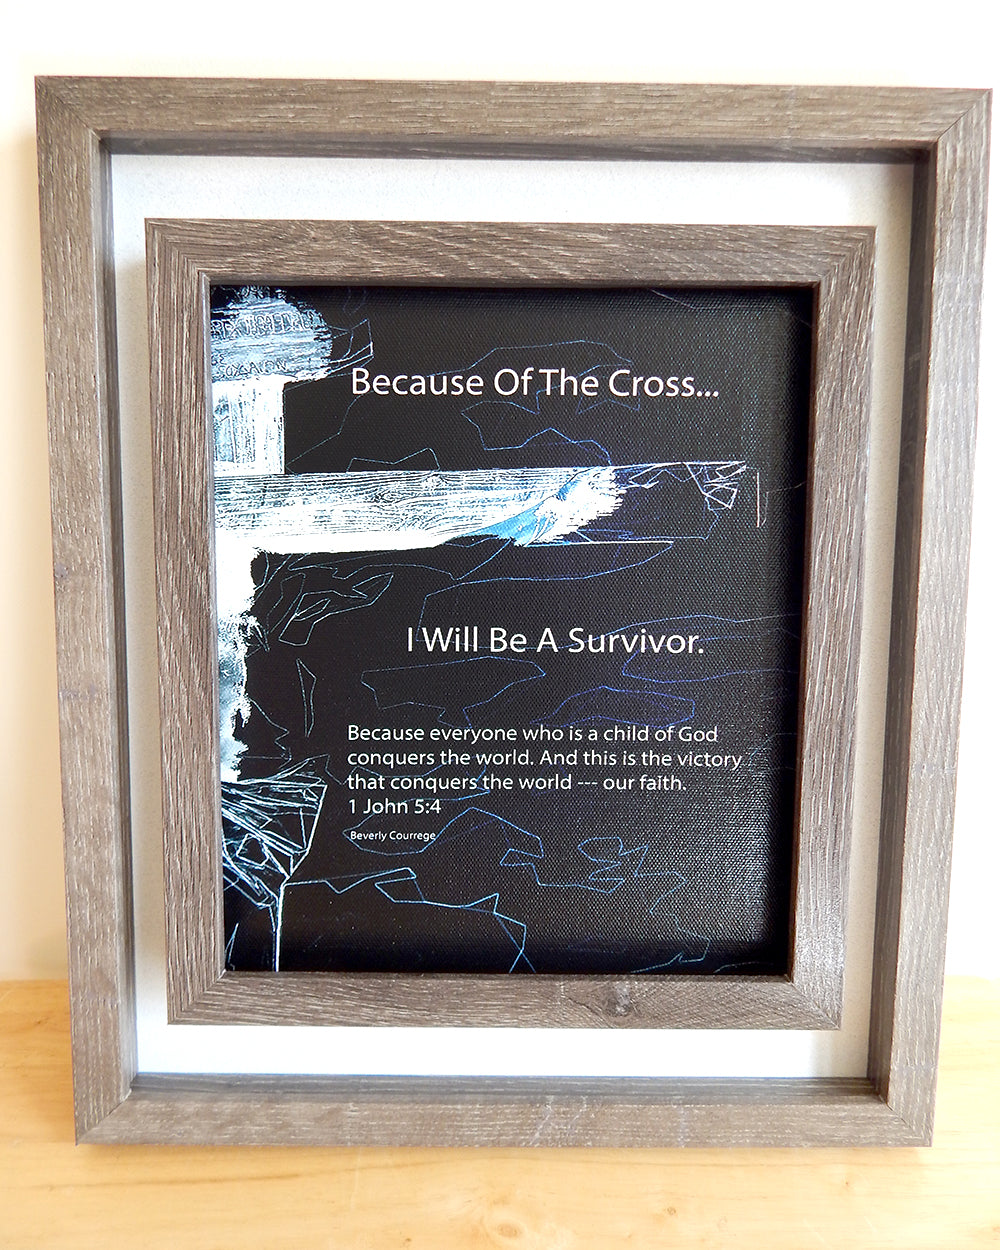 Because Of The Cross... Series -I WILL BE A SURVIVOR 2-11 -(Canvas Print in unglass frame) Free Shipping